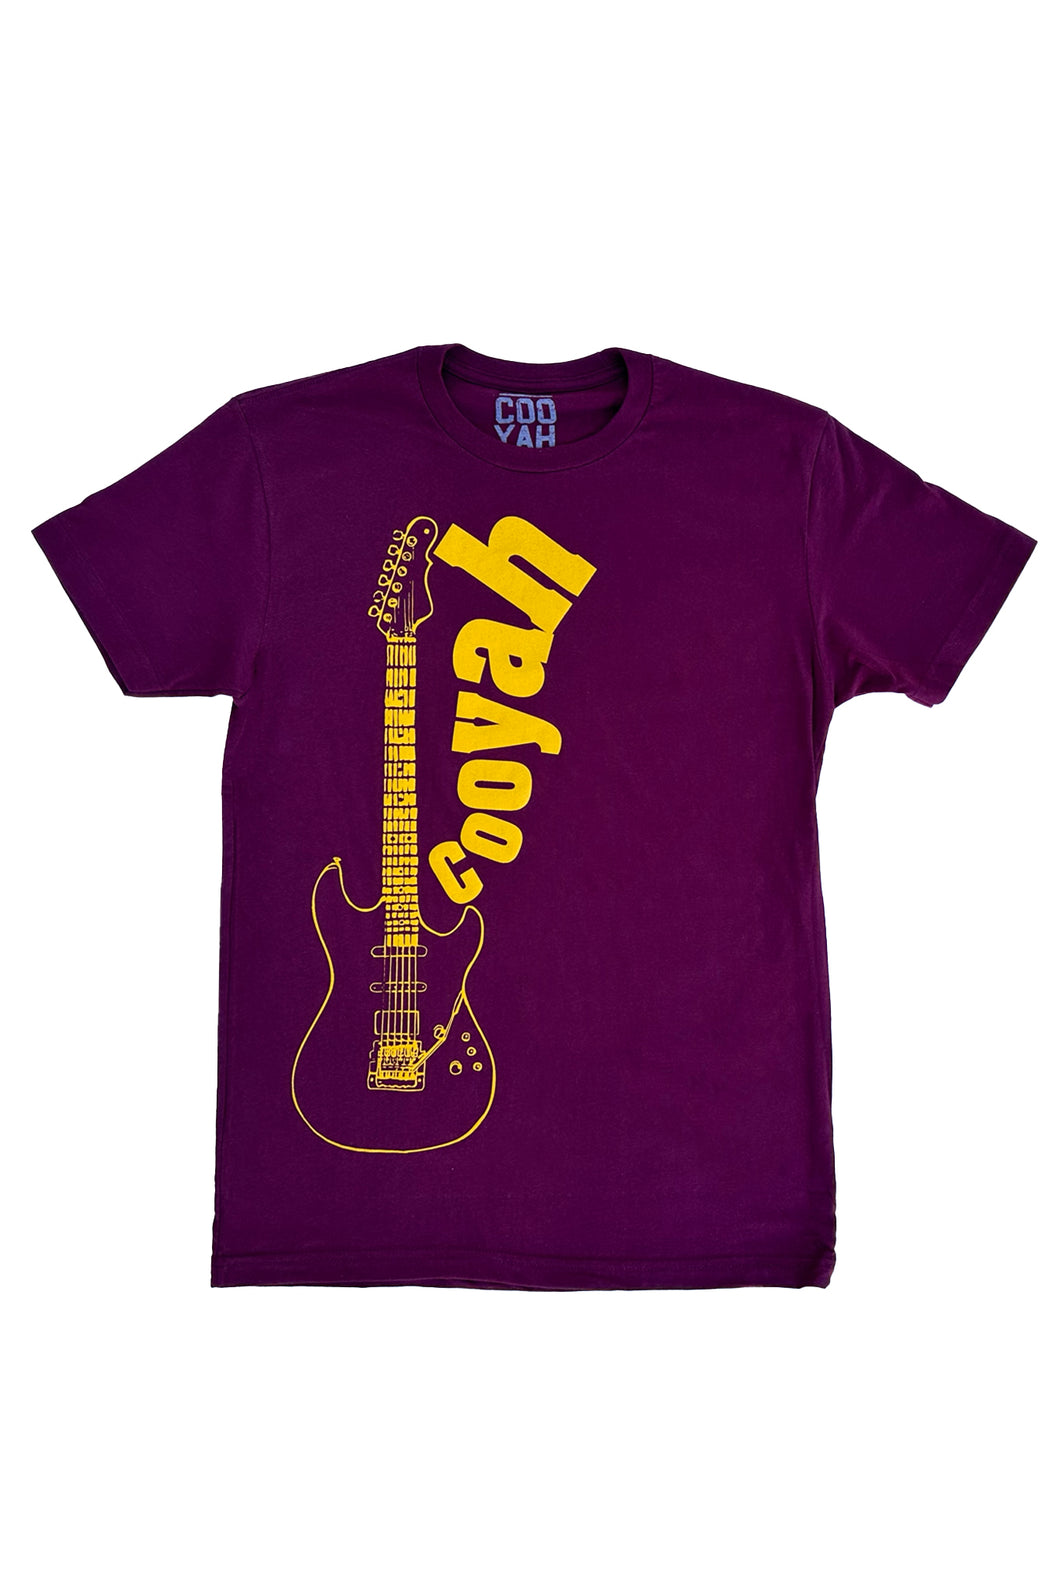 COOYAH Jamaica.  Women's relaxed fit Guitar tee in burgundy.  Jamaican reggae clothing brand since 1987.  IRIE